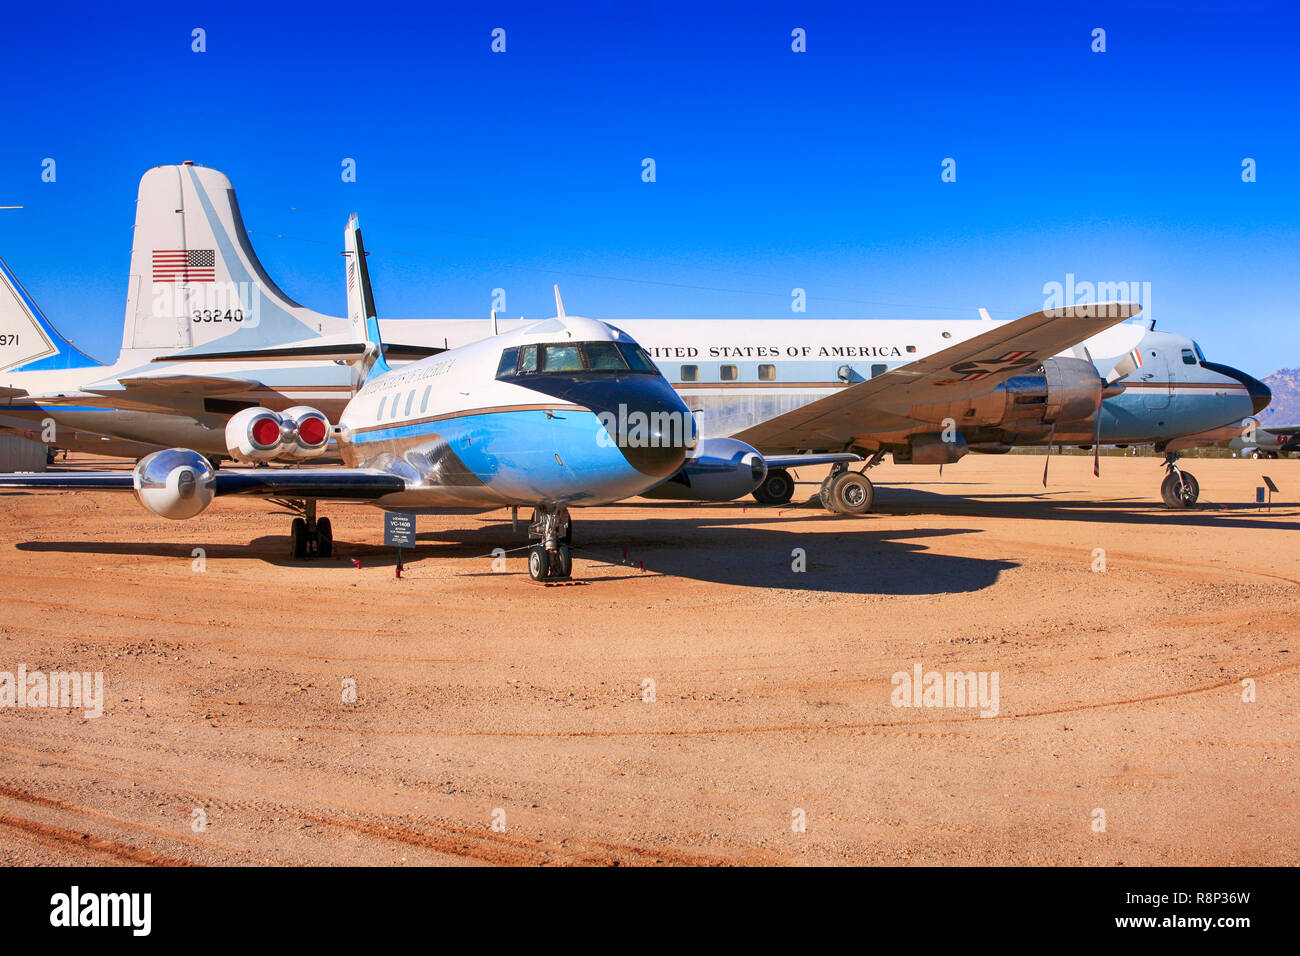 Lockheed VC-140B Jetstar and Douglas DC-4 Presidential flight aircraft on display at the Pima Air & Space Museum in Tucson, AZ Stock Photo